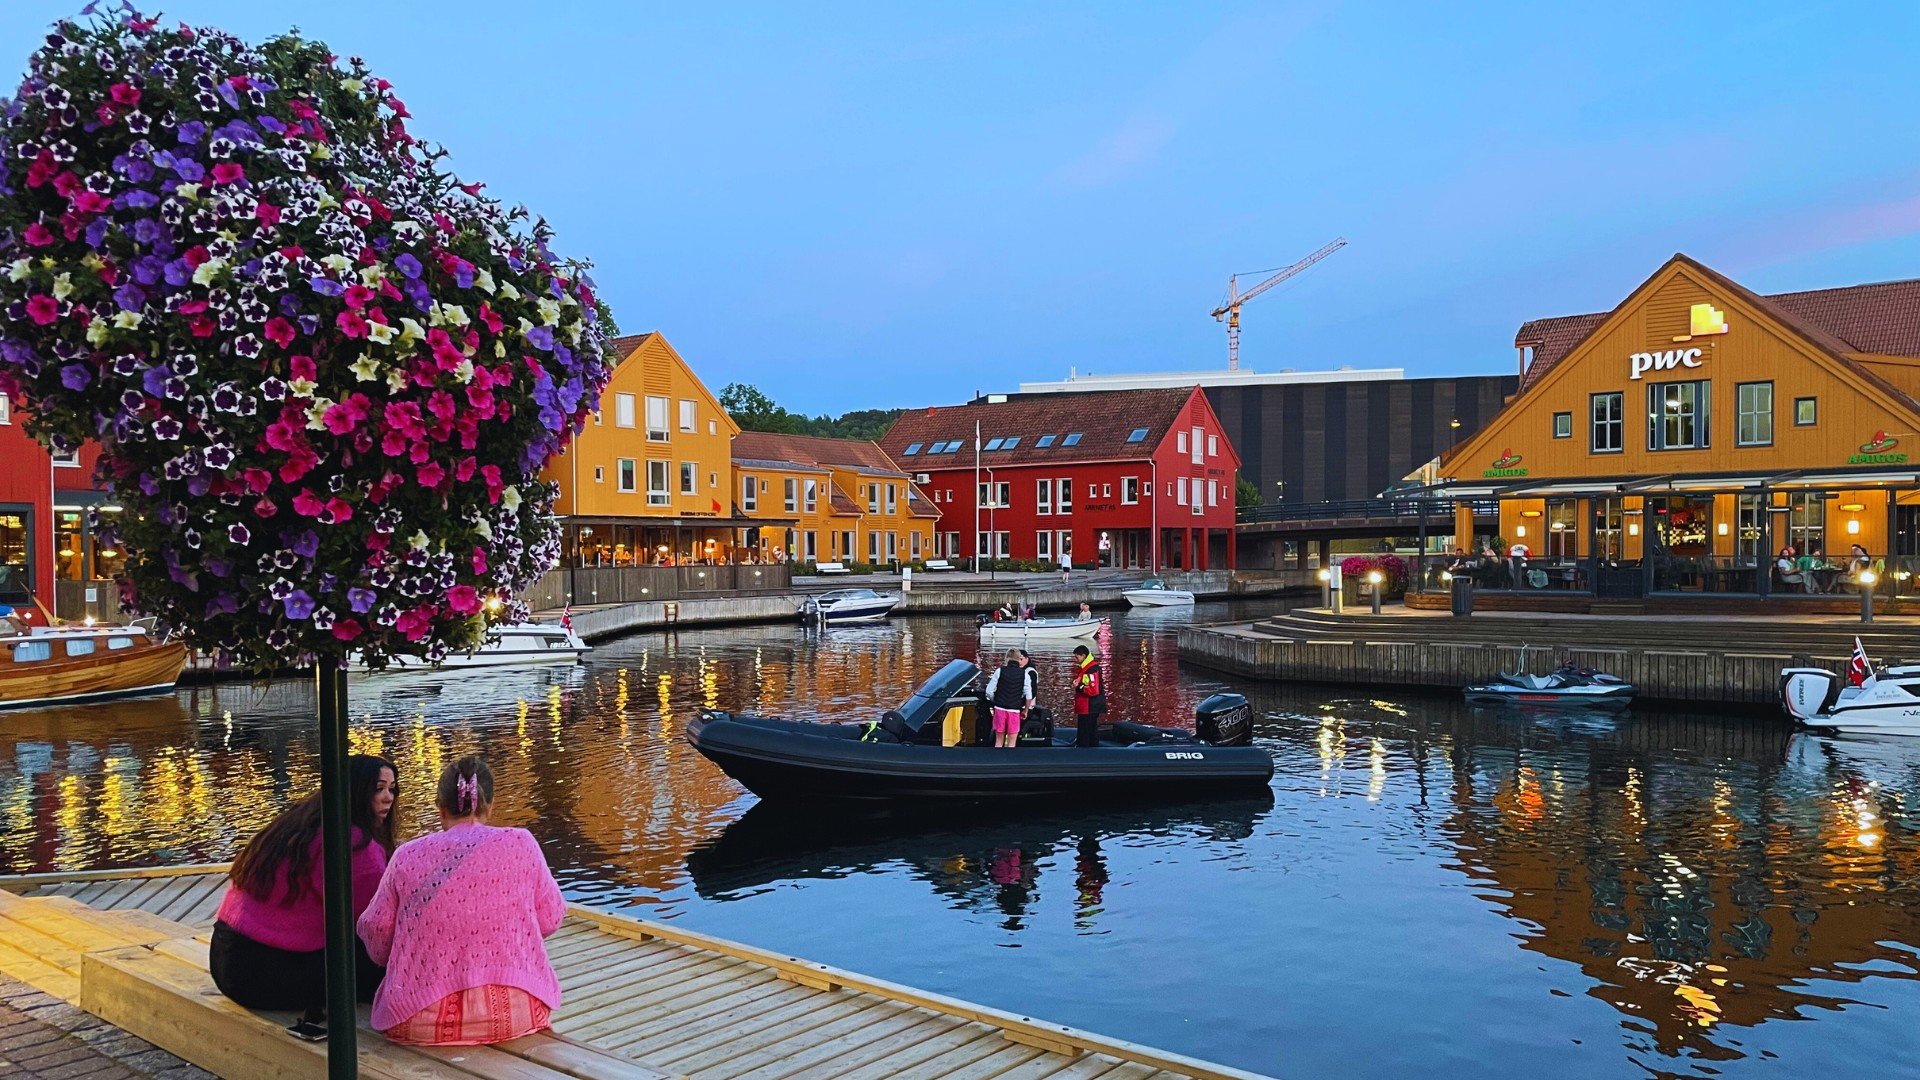 Kristiansand harbour in the summer. Photo: David Nikel.